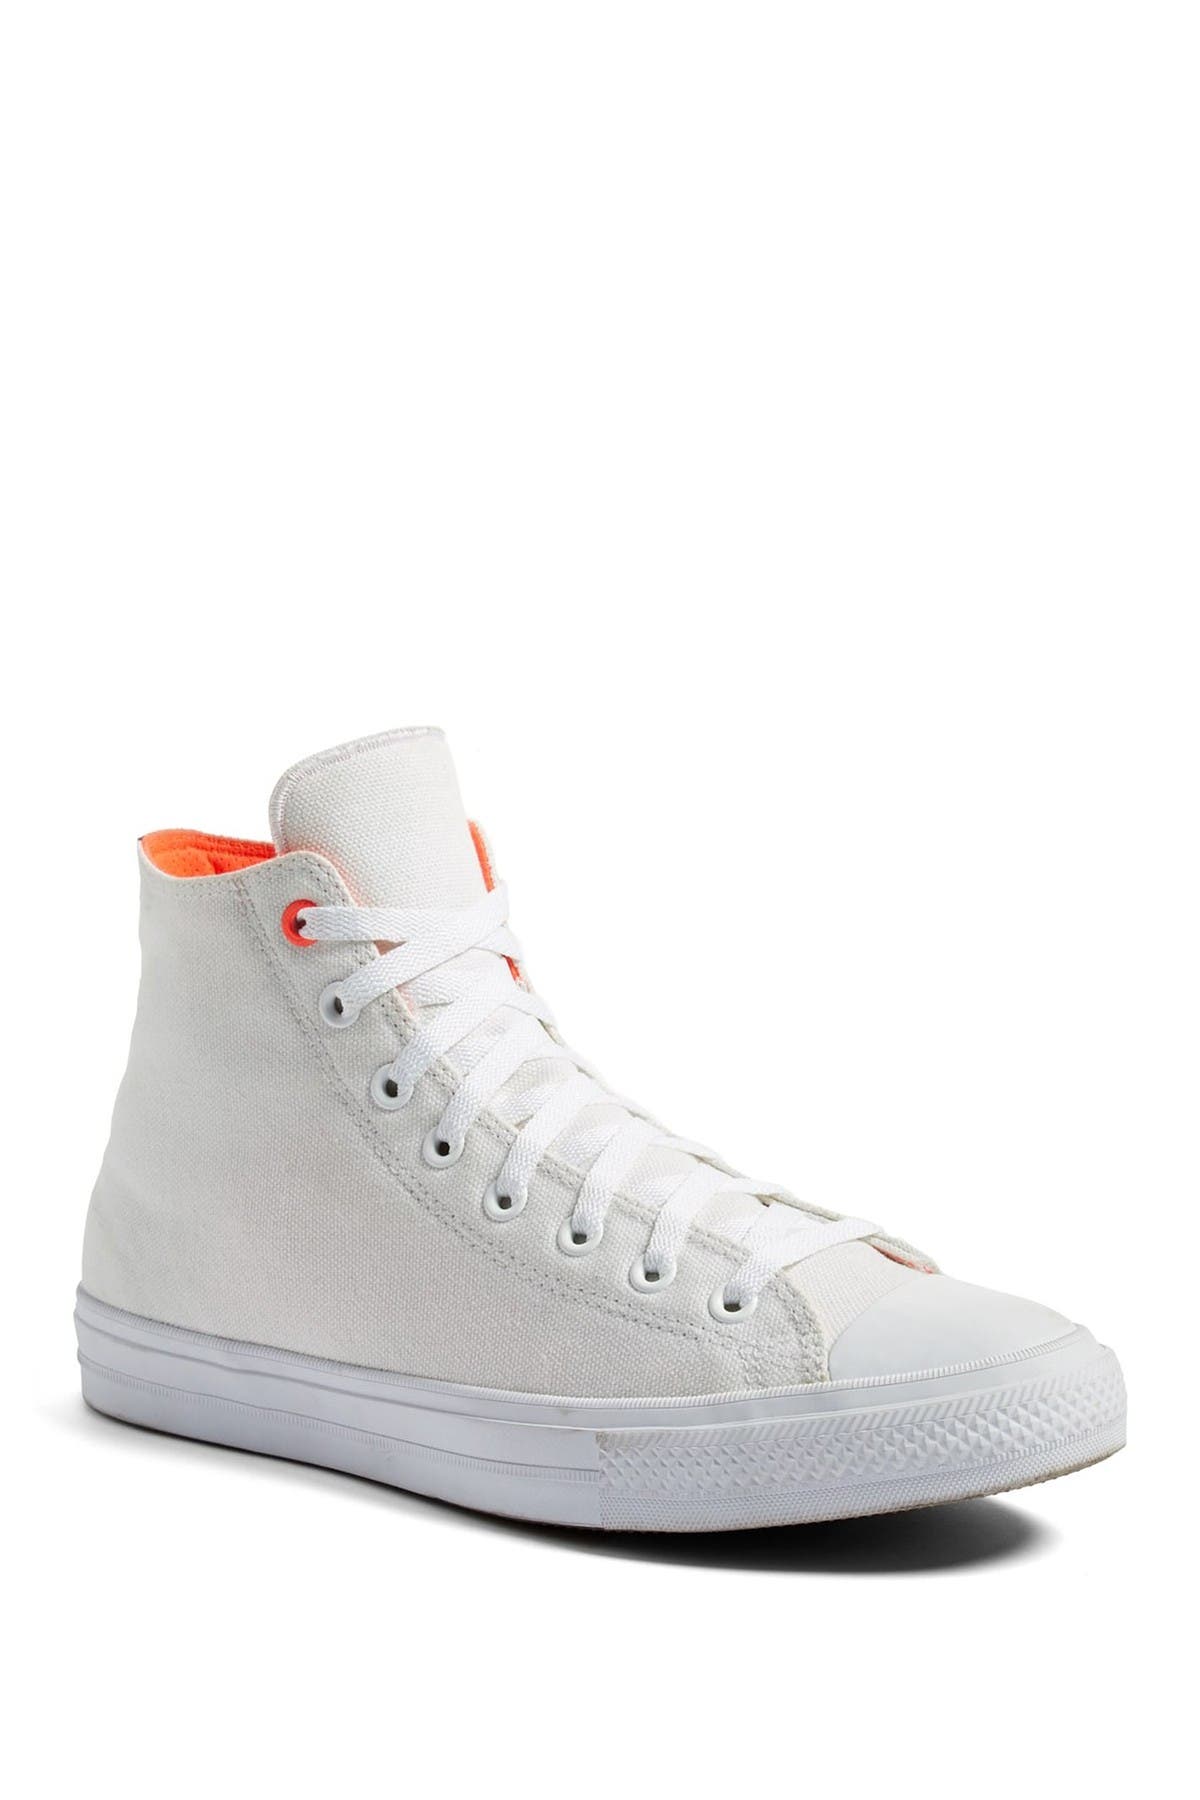 Converse | Chuck Taylor All Star II SHield Water Repellent High Top Sneaker  | Nordstrom Rack